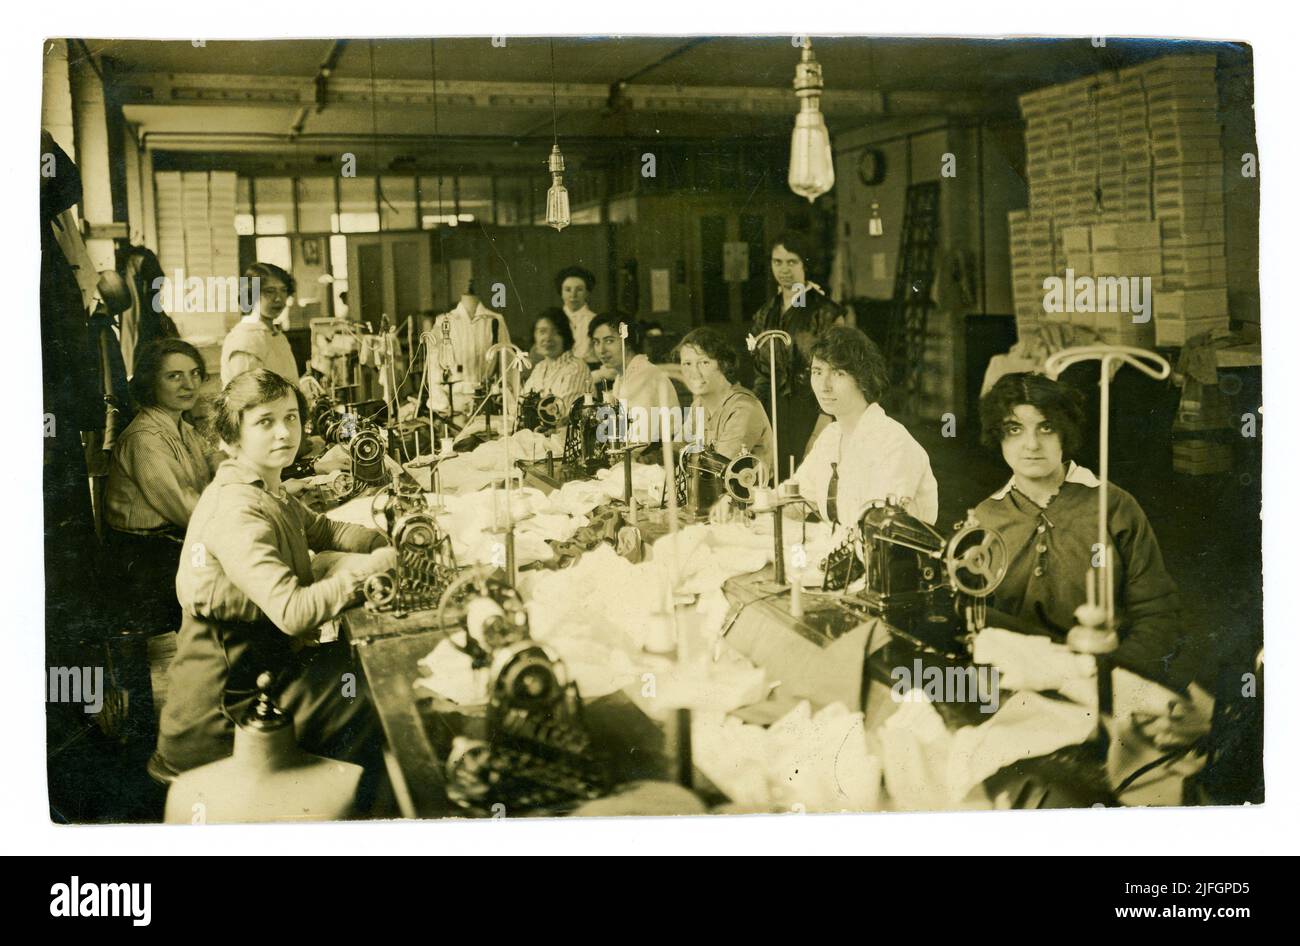 Original WW1 era photograph of a group of young working class women machinists working in a factory making blouses using treadle sewing machines, one blouse is displayed on a dressmaker's dummy, each lady has a dressmaker's counter-top display stand to put the finished blouse on. A manageress looks on in the background. Early light bulbs hang above the workbench. Circa 1916. U.K. Stock Photo